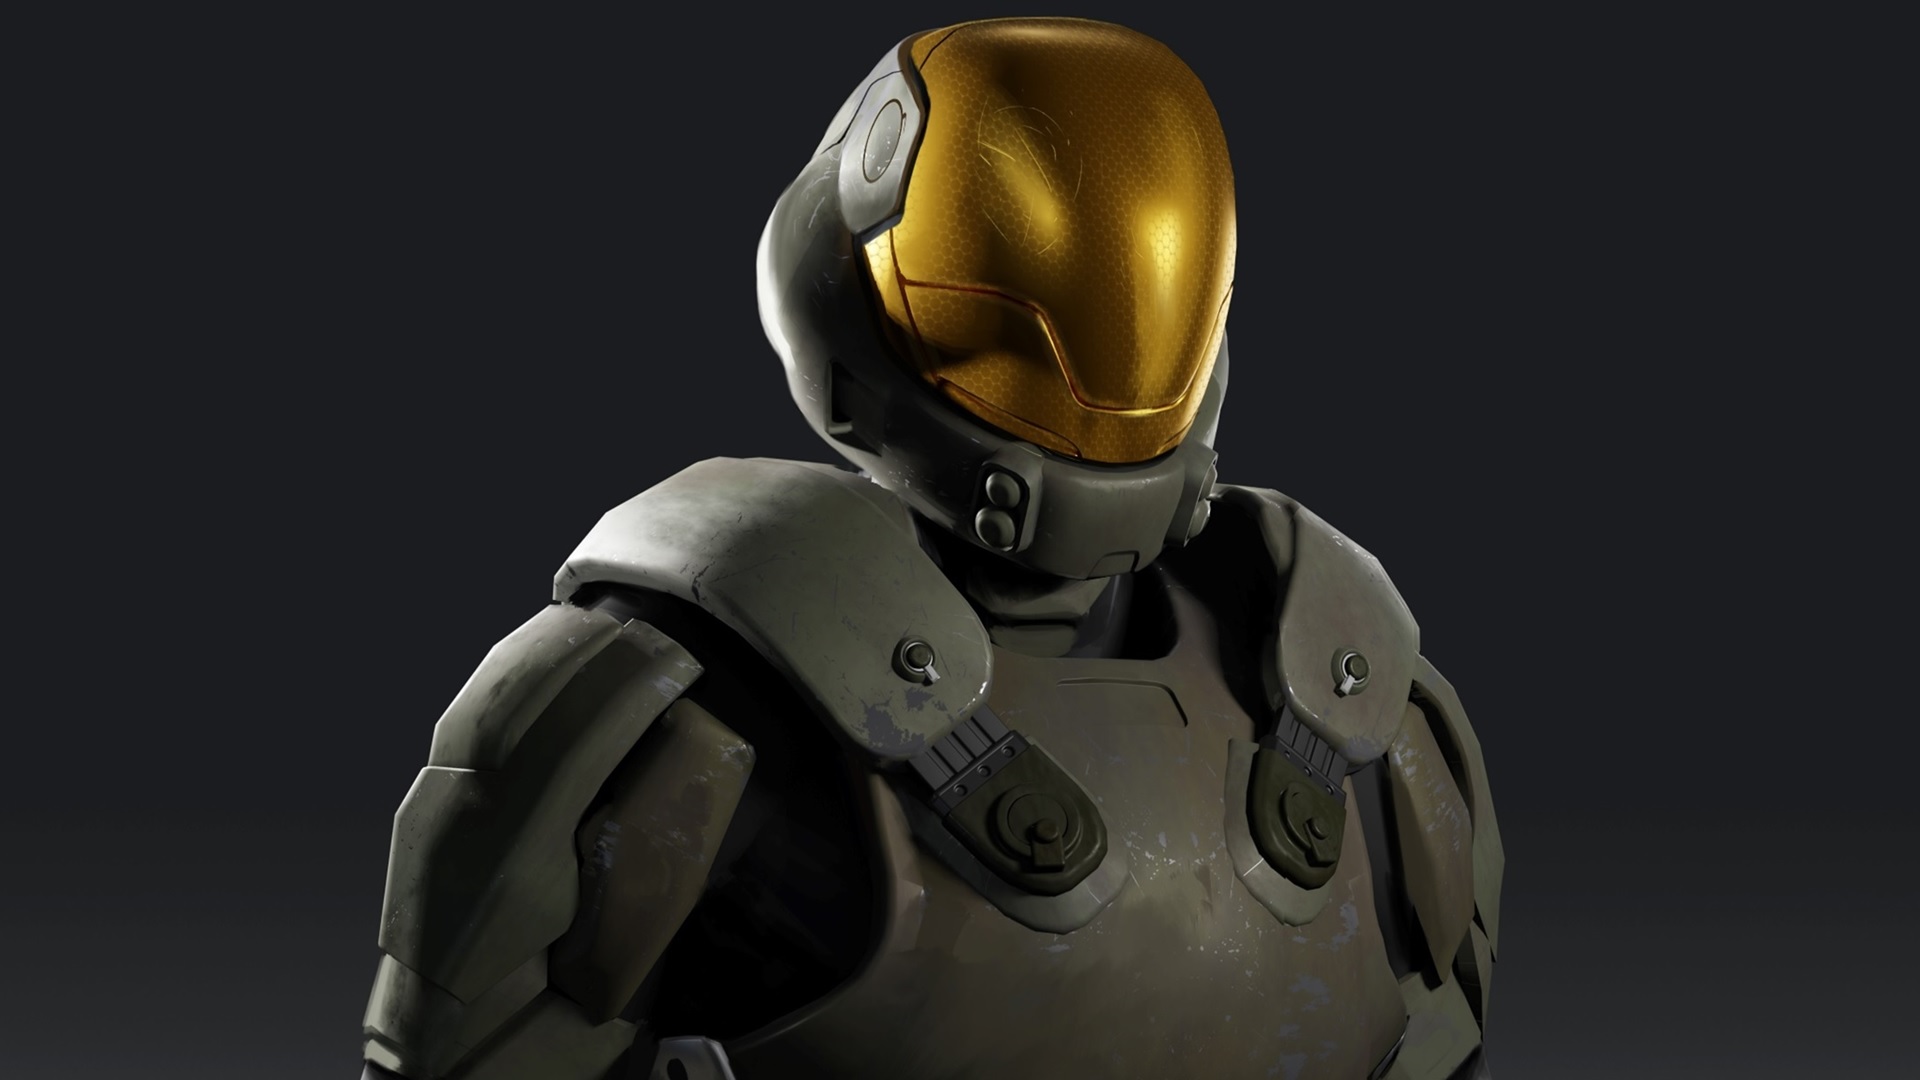 Crop of SPI armor depicted in the 2022 Halo Encyclopedia